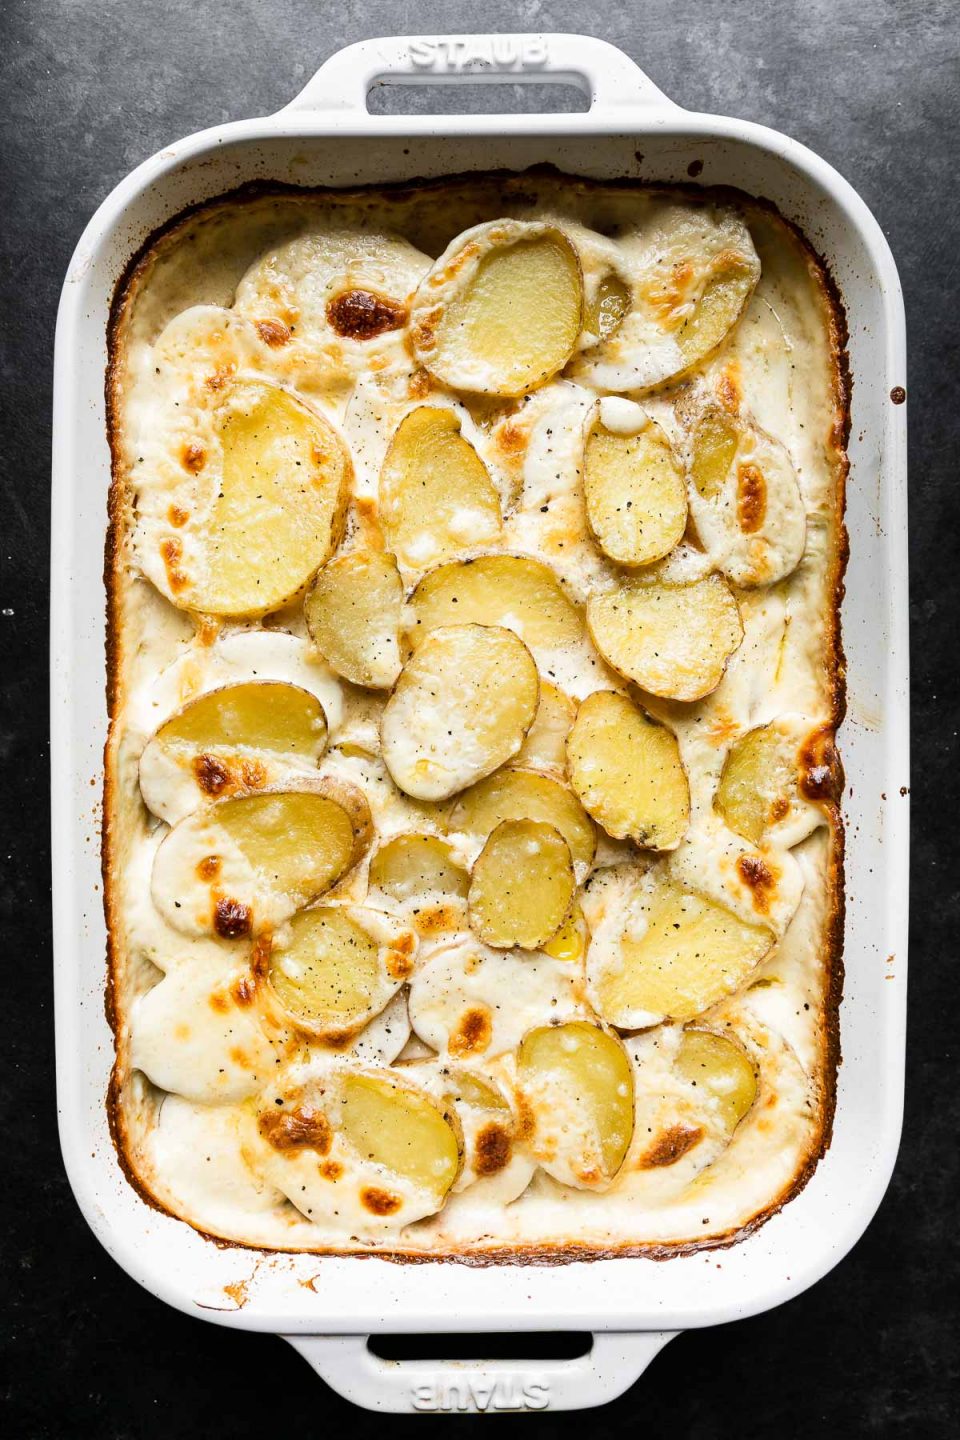 Baked potatoes au gratin in a white Staub baking dish. The baking dish sits atop a dark textured surface.